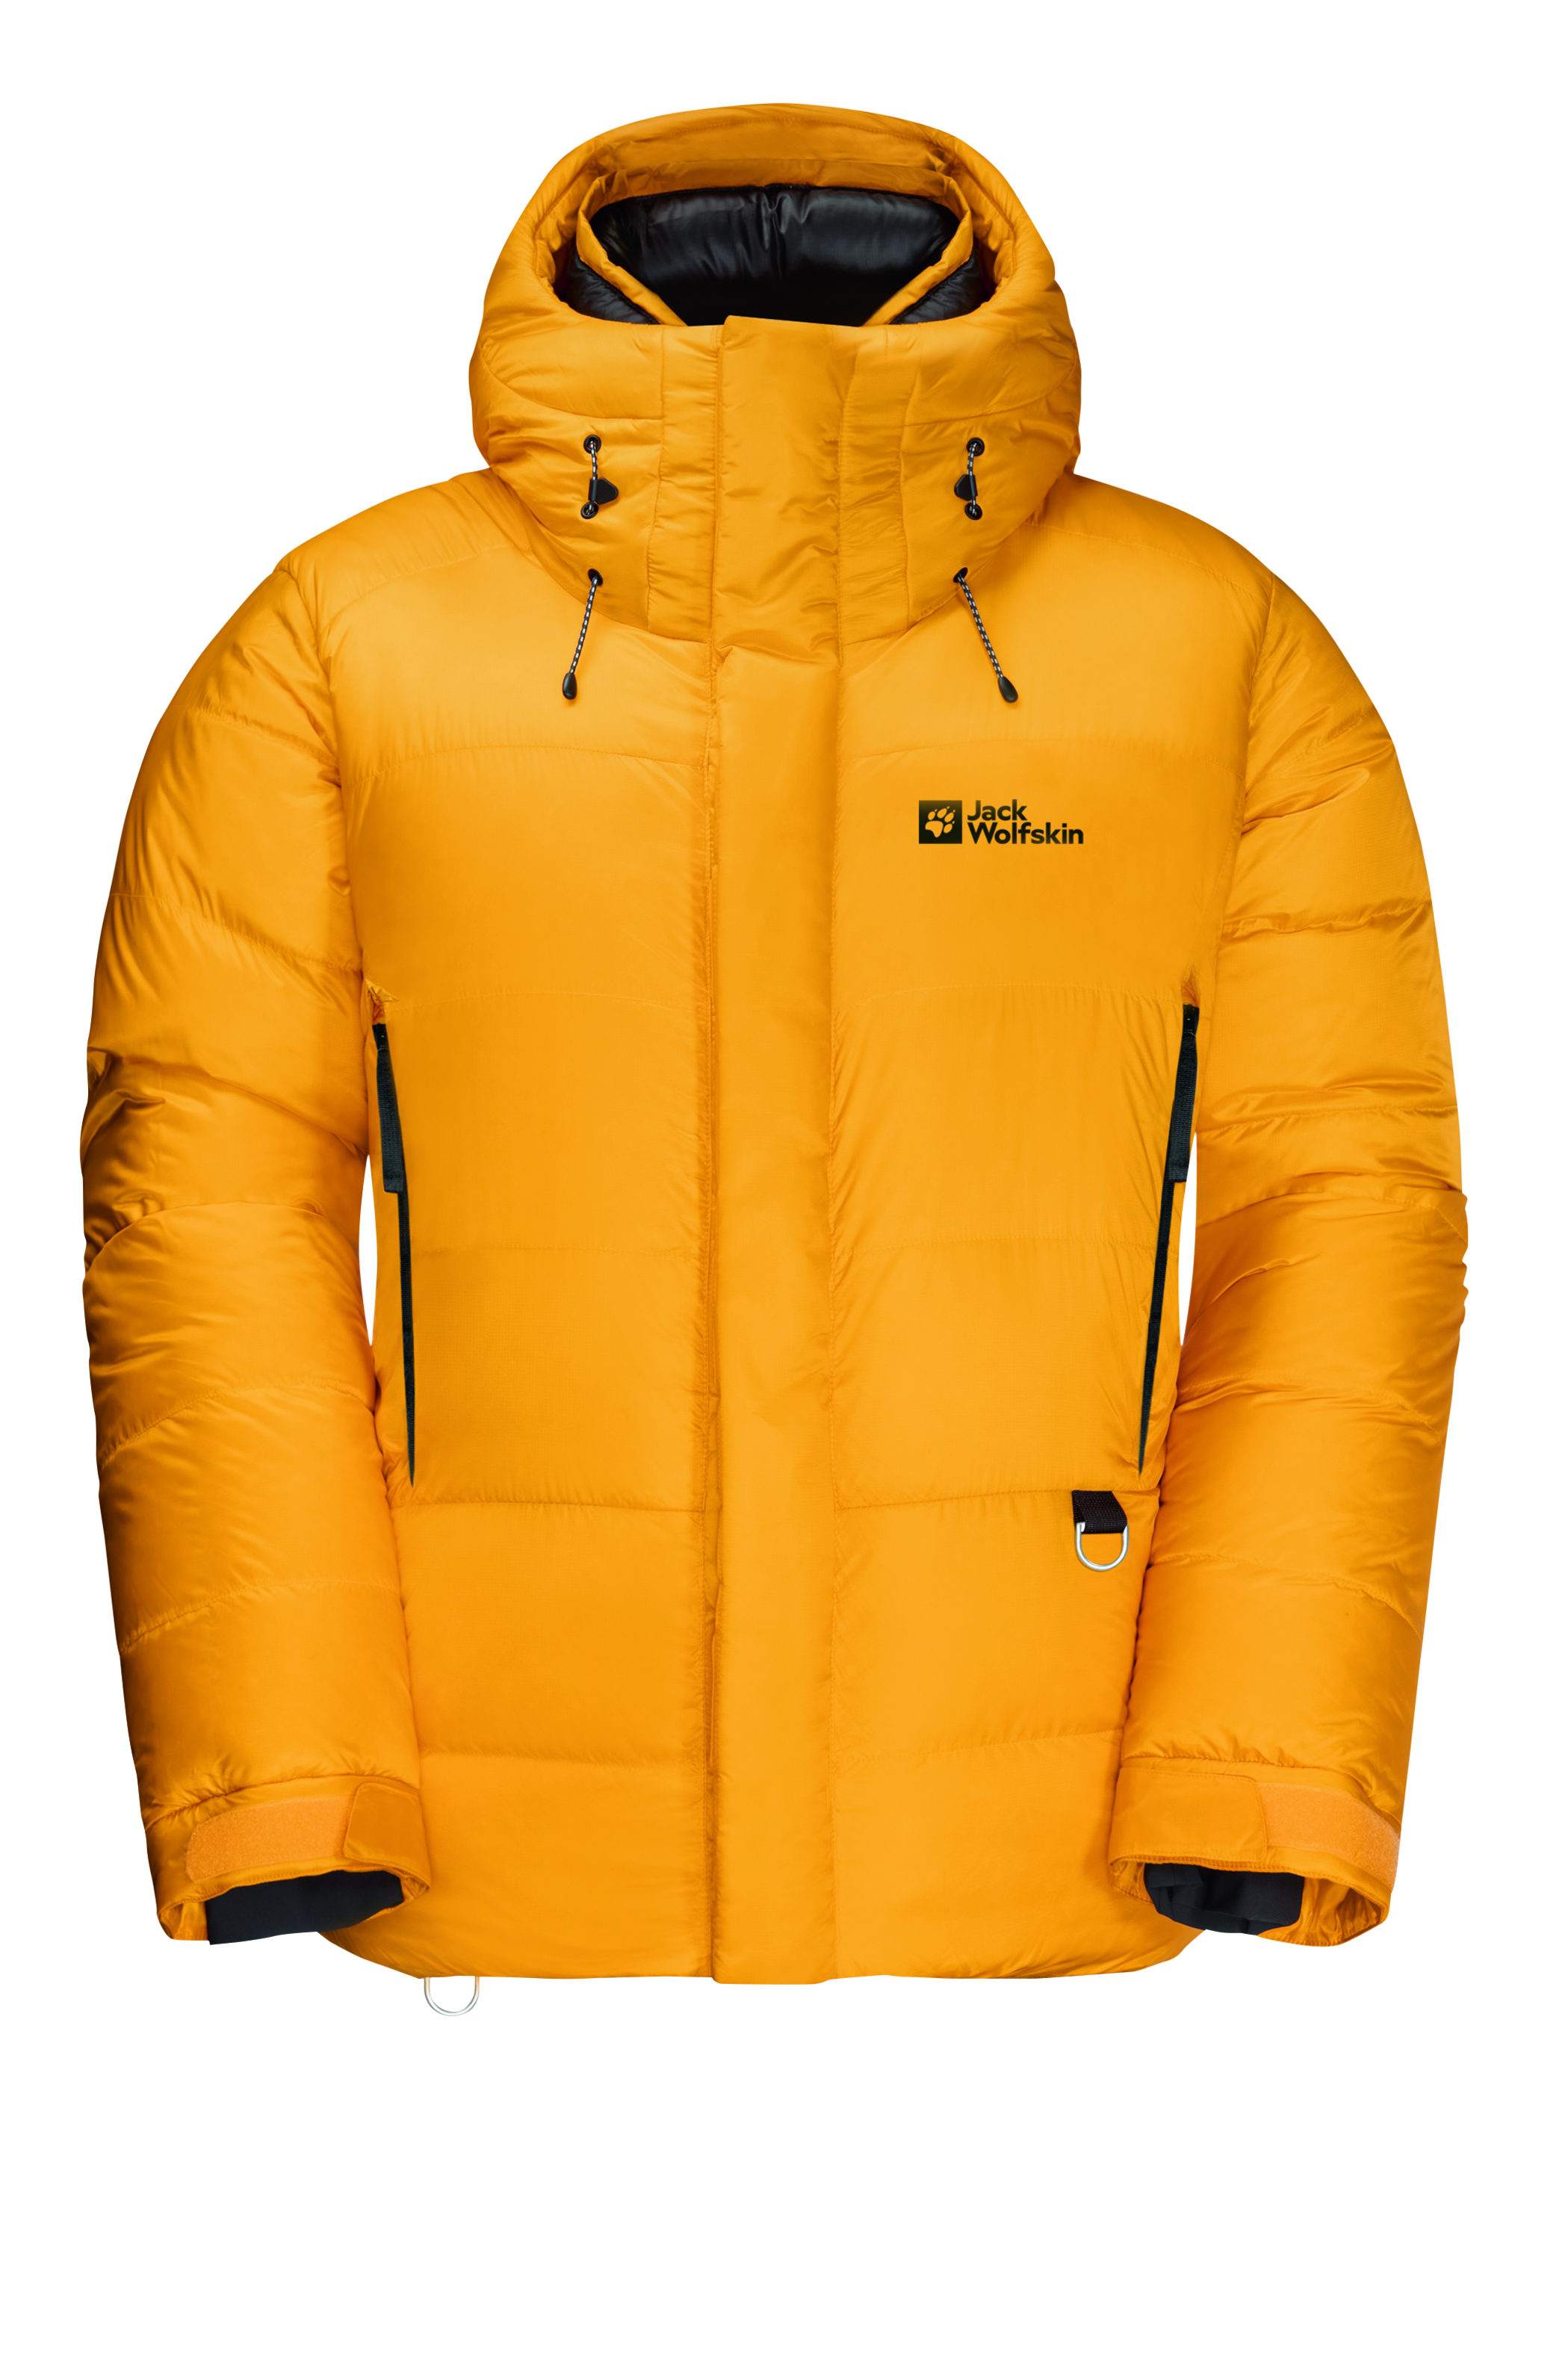 Jack Wolfskin Discovery Campaign Inspires Outdoor Awareness and Advocacy – JACK  WOLFSKIN